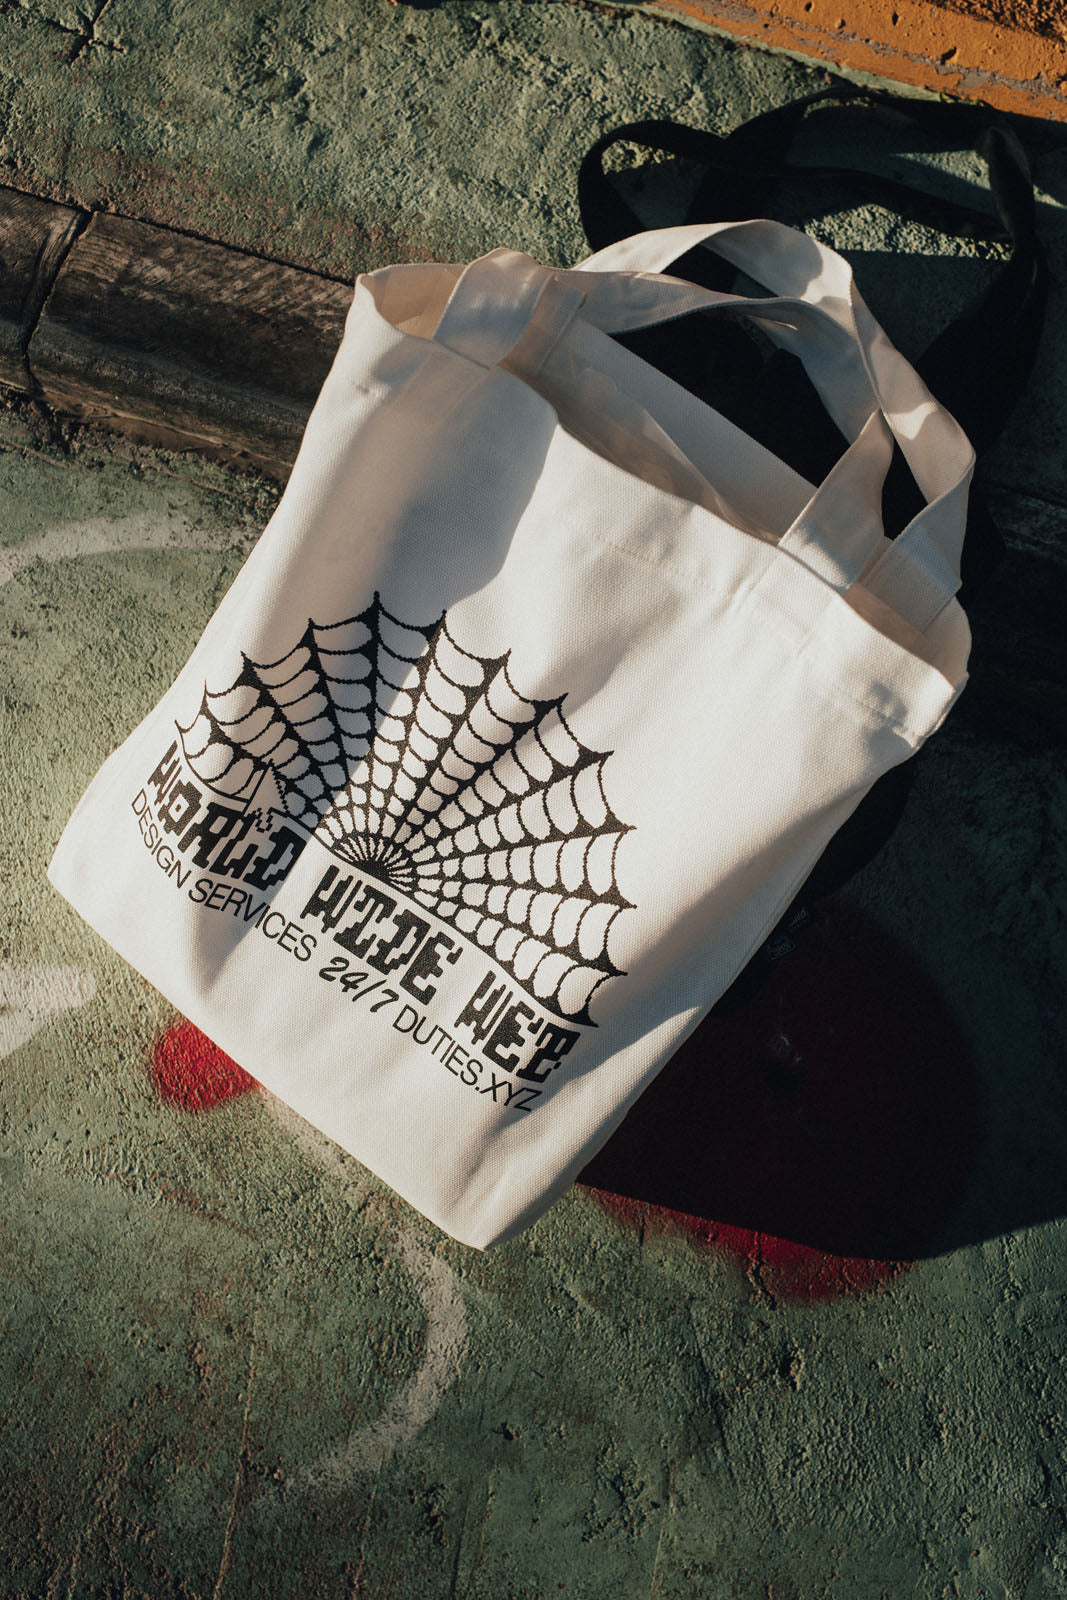 Photo of the Ecru-colored Duties World Wide Web tote bag from above, showcasing the black graphic print. The tote bag is standing on a green colored concrete surface.